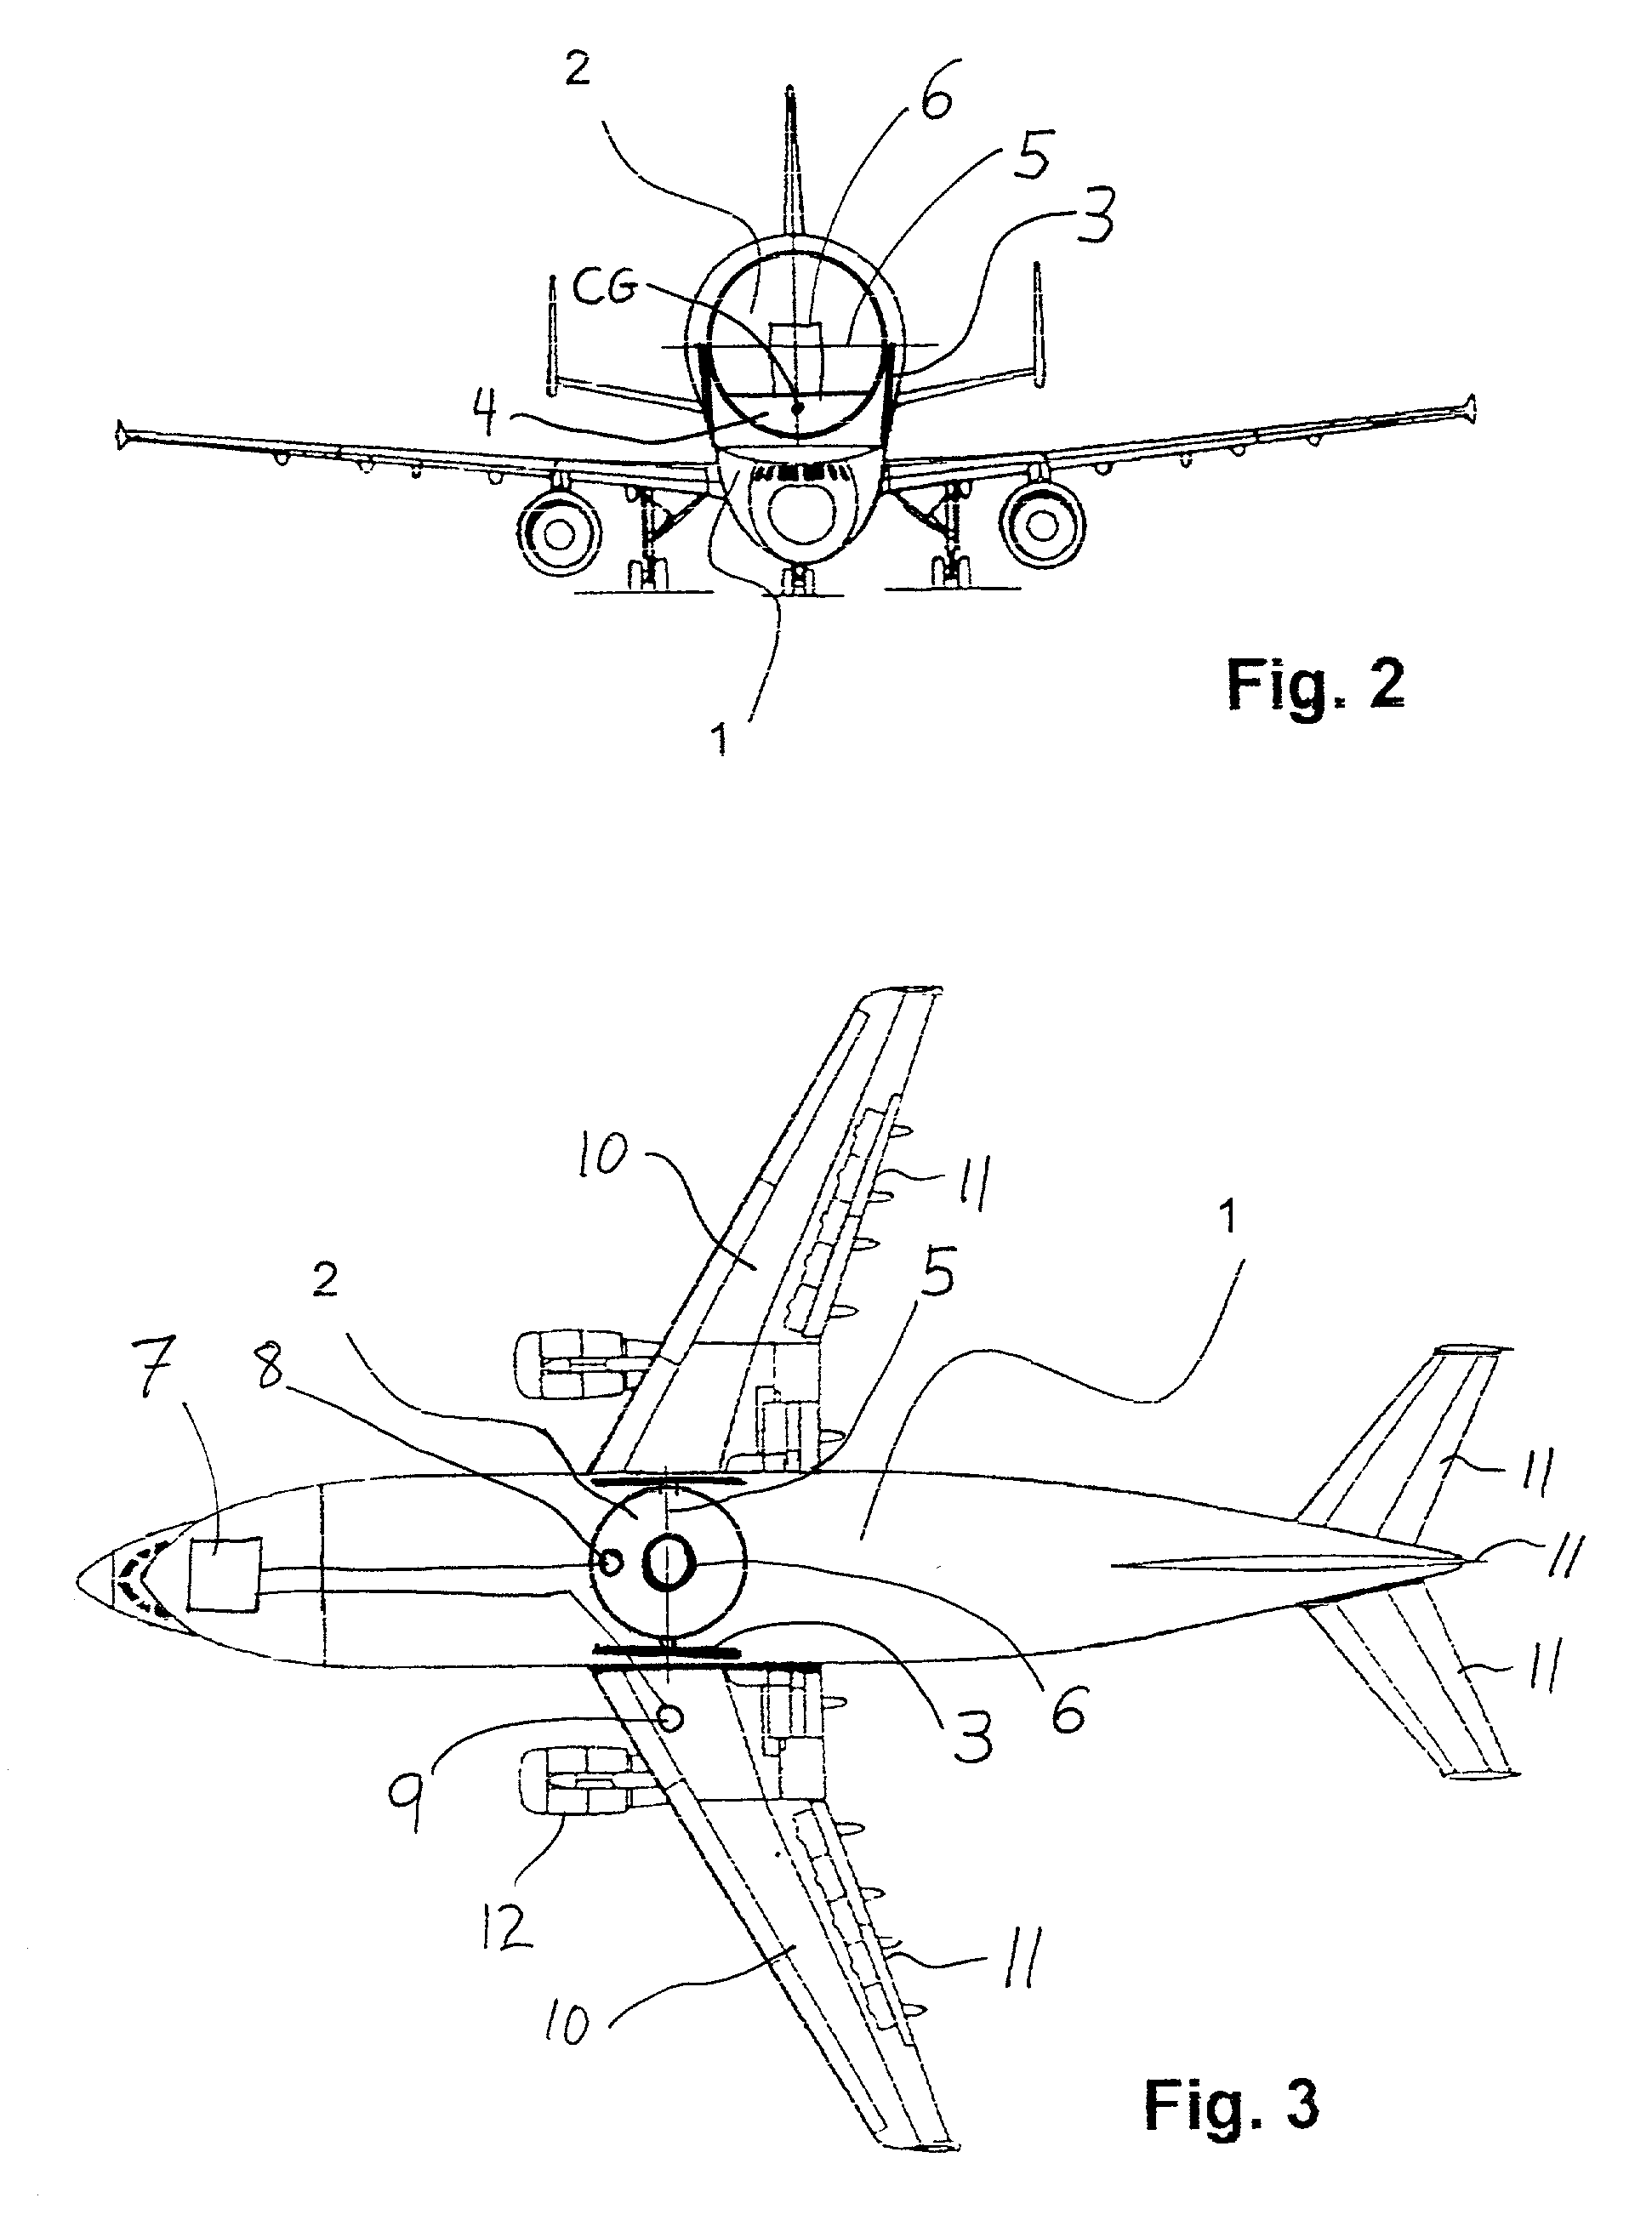 Method and apparatus for aircraft-based simulation of variable accelerations and reduced gravity conditions